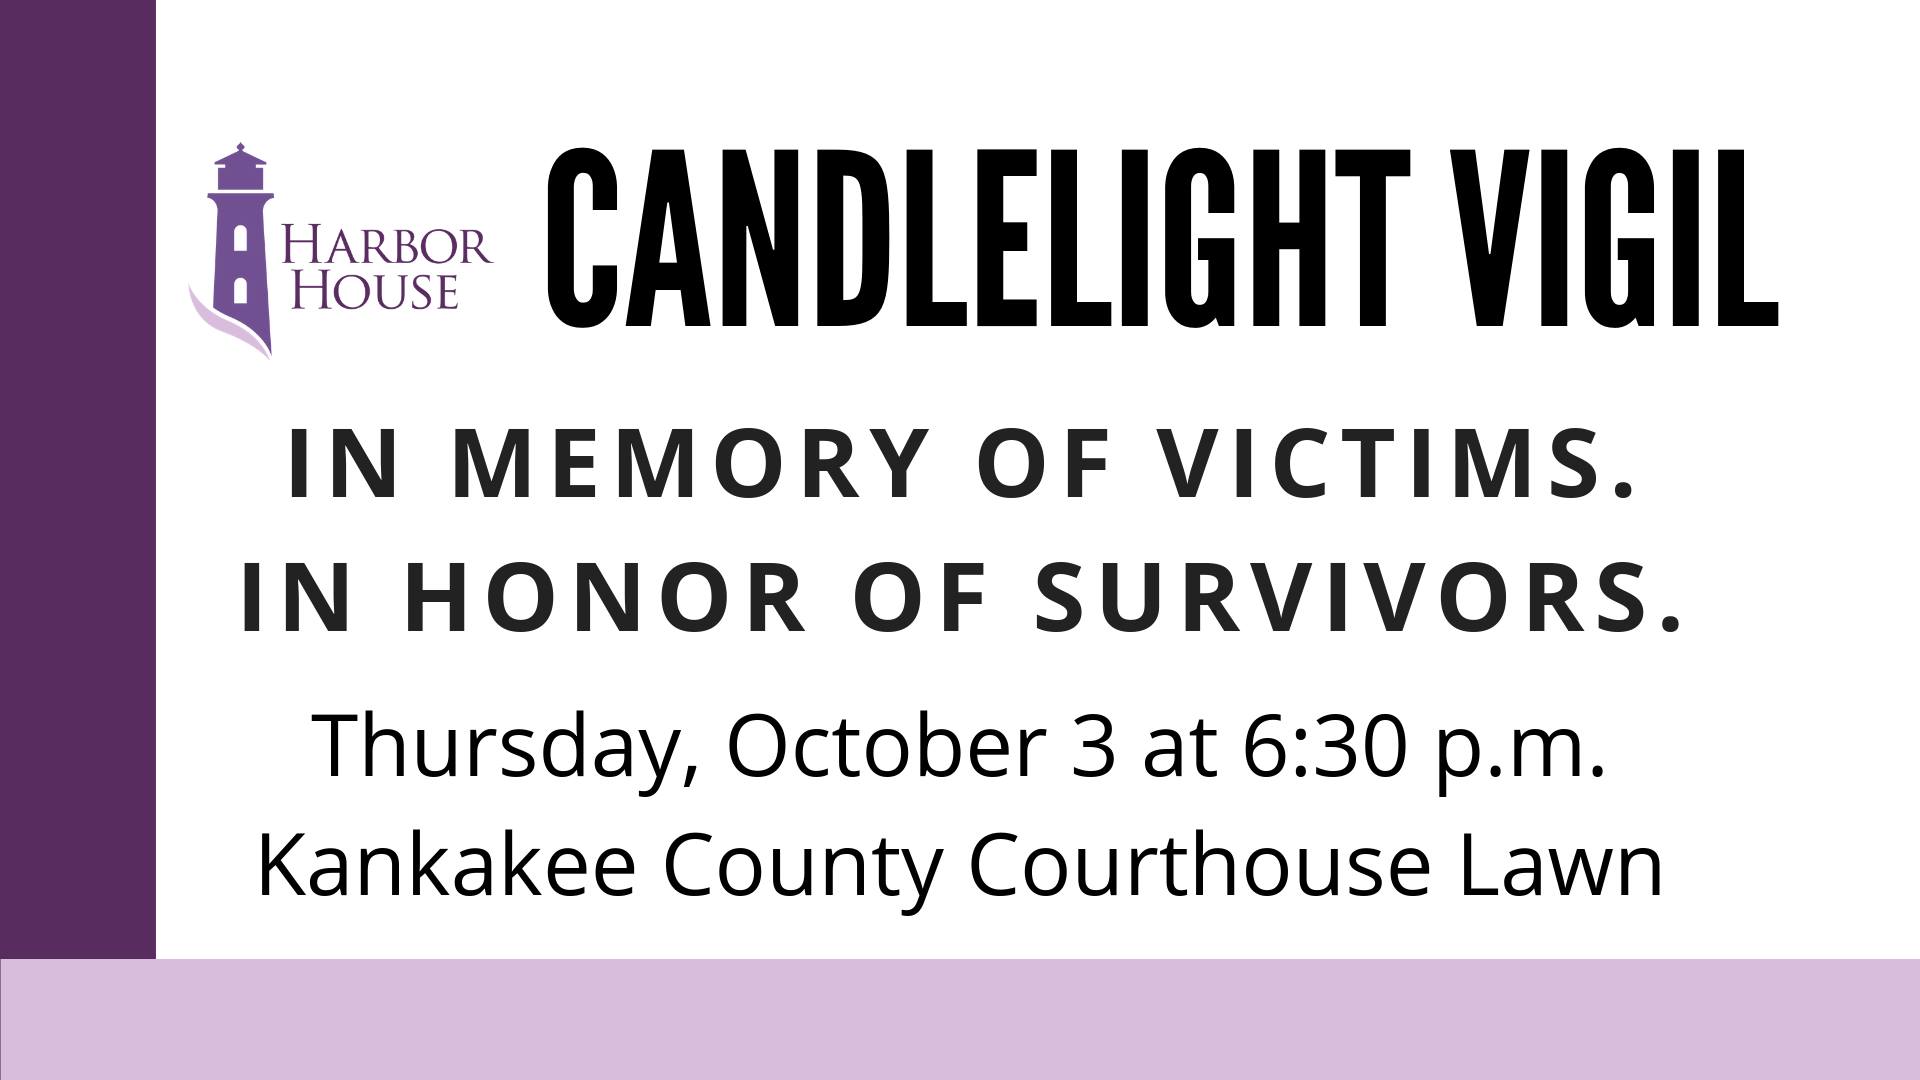 Candlelight Vigil for Survivors and Victims of Domestic Violence